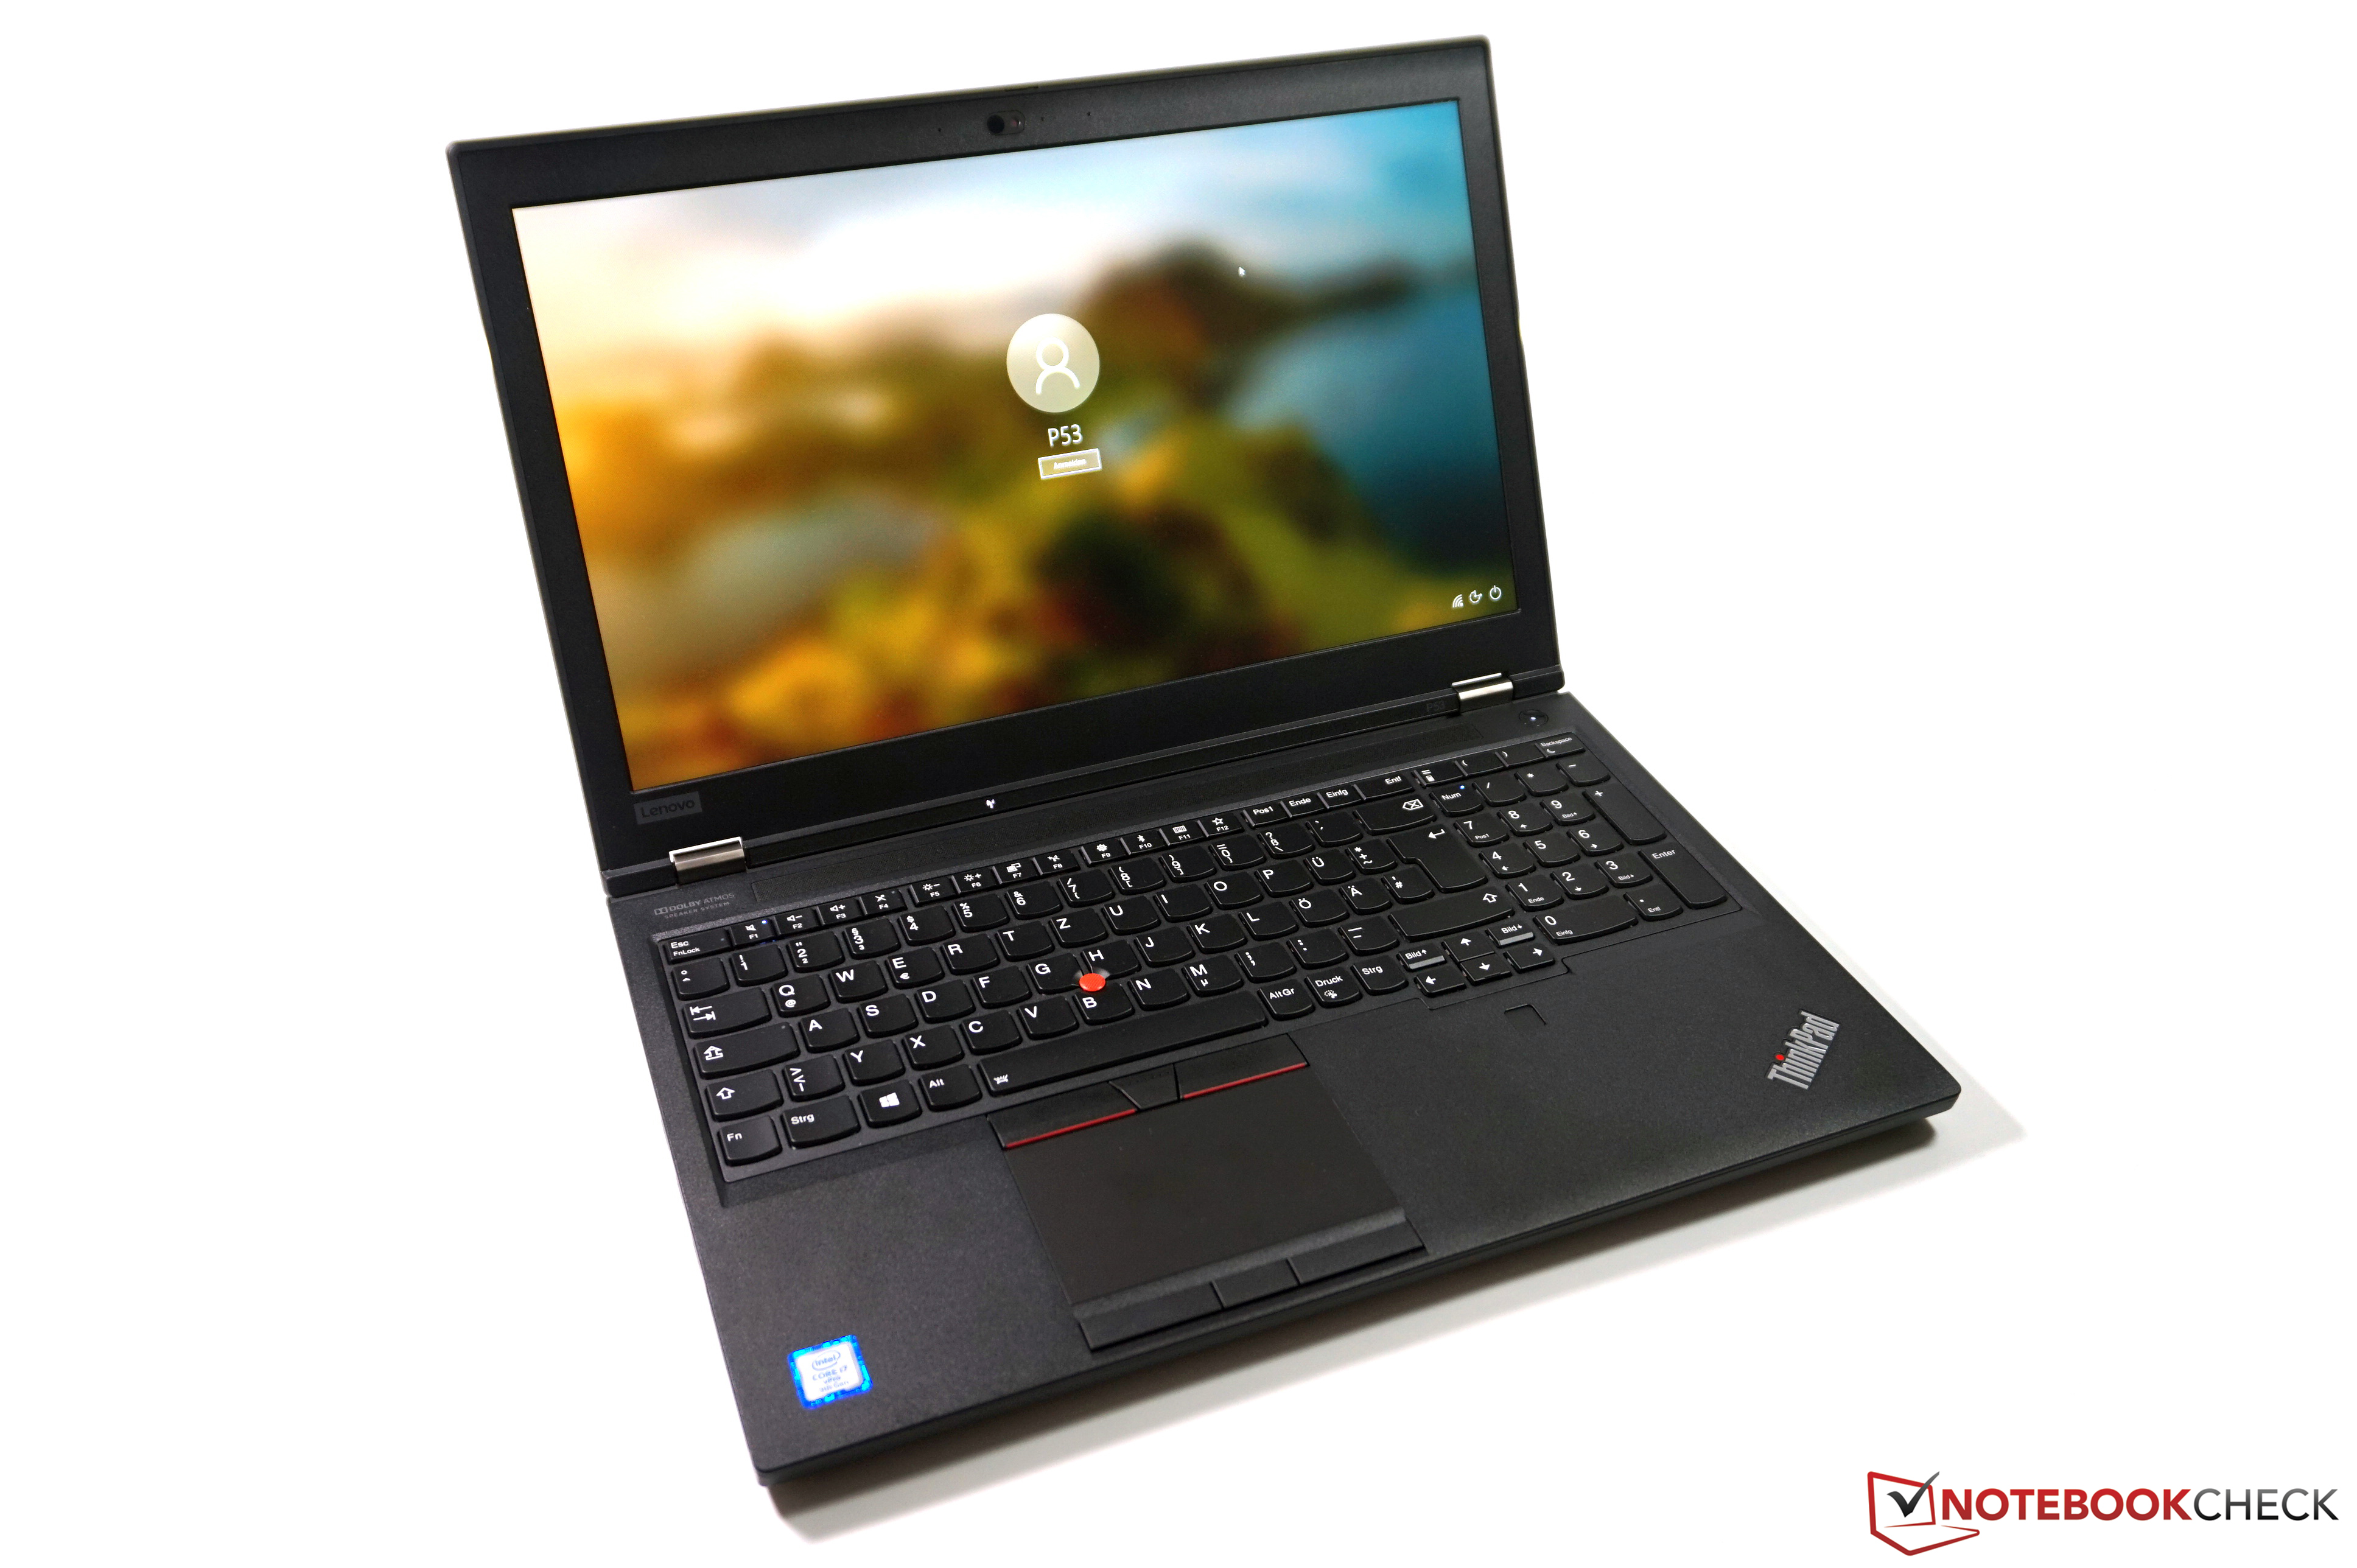 Lenovo ThinkPad P53 in Review: Classic workstation with a lot of